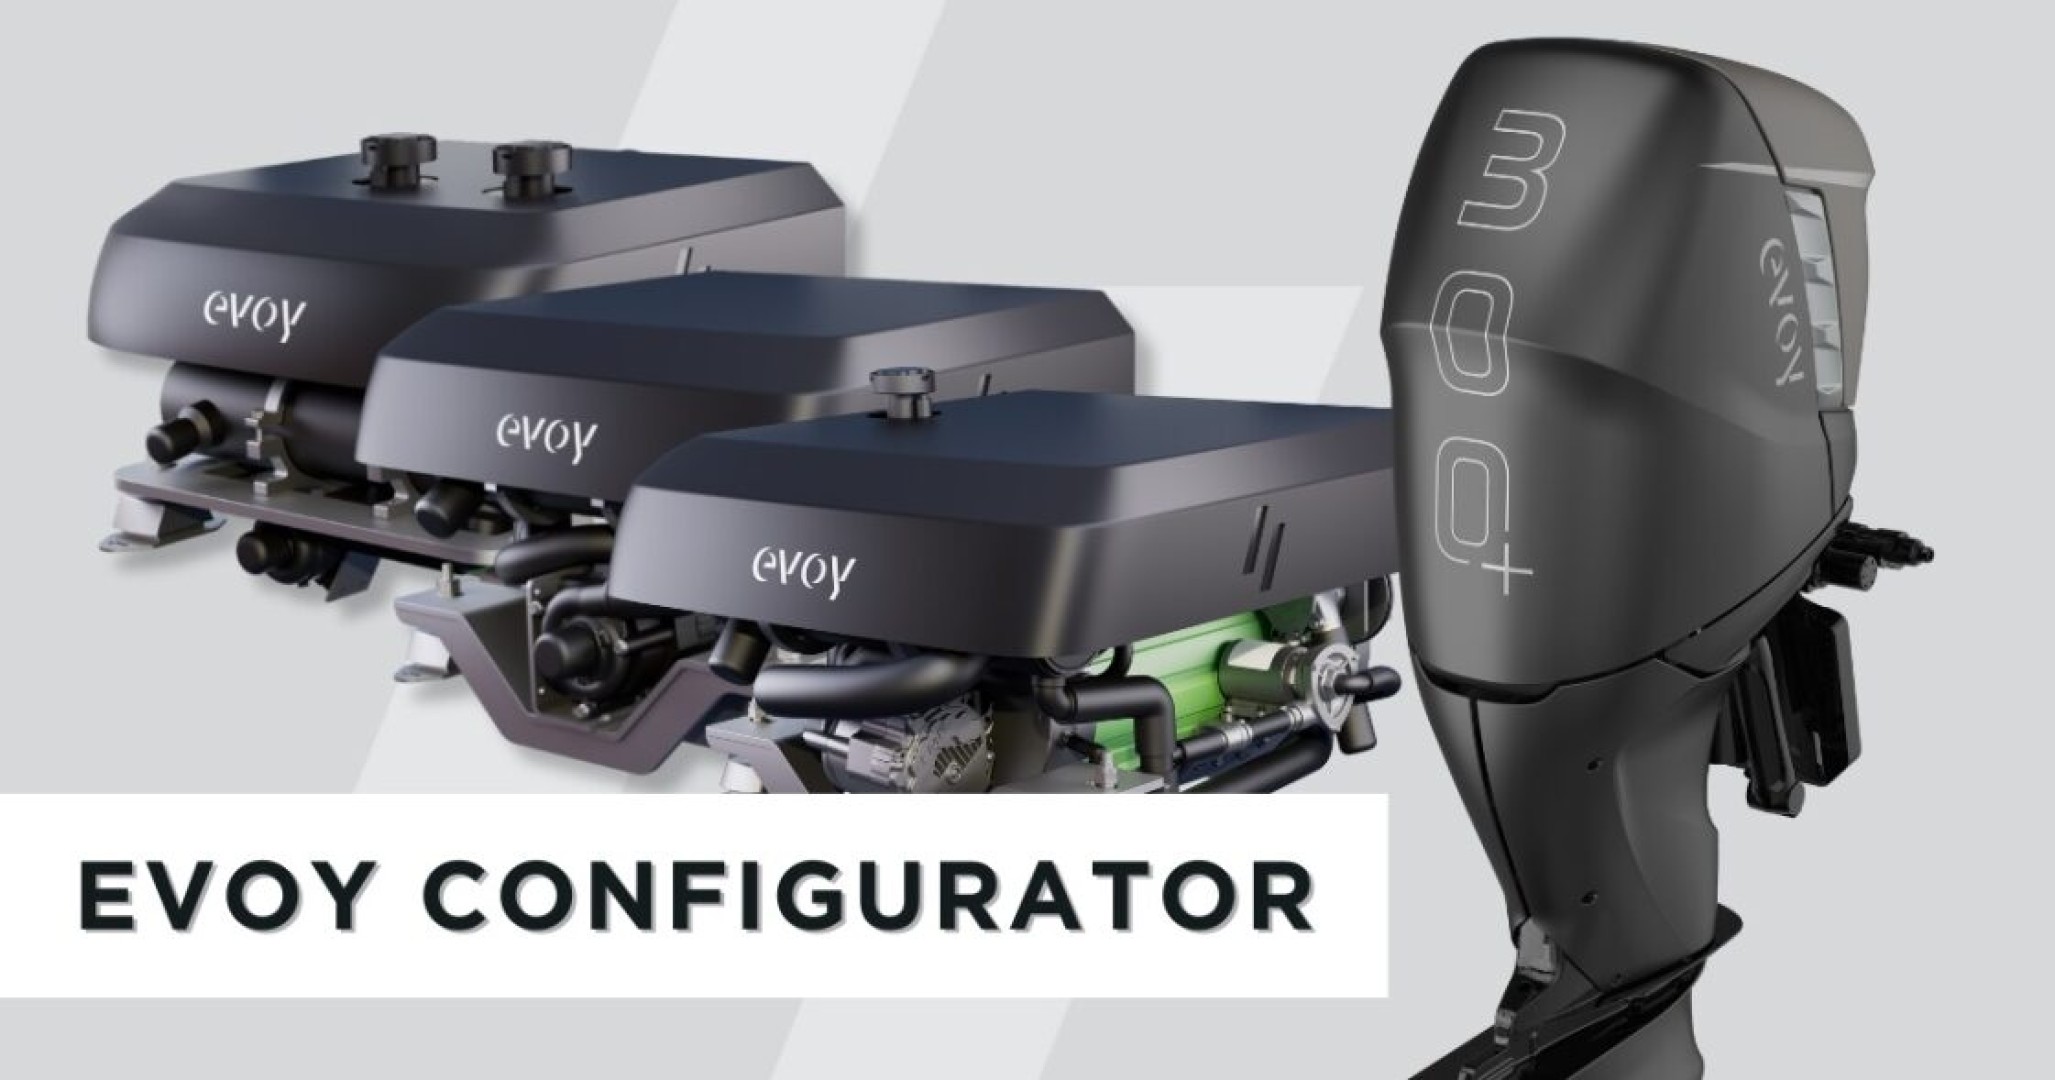 Evoy launches a digital configurator to make electric boat design intuitive